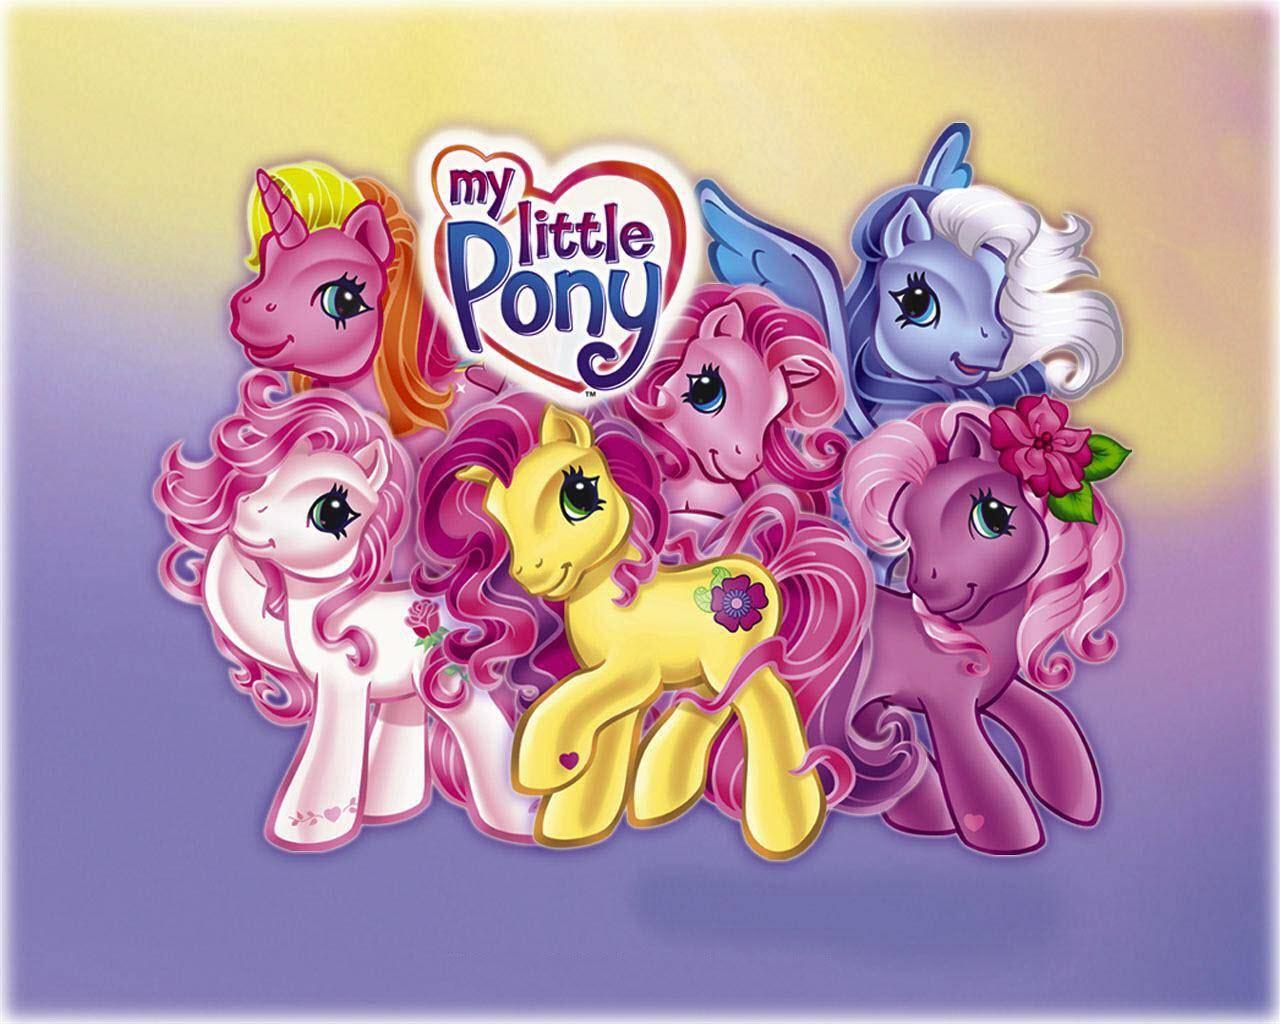 My Little Pony Friendship is Magic HD Wallpapers